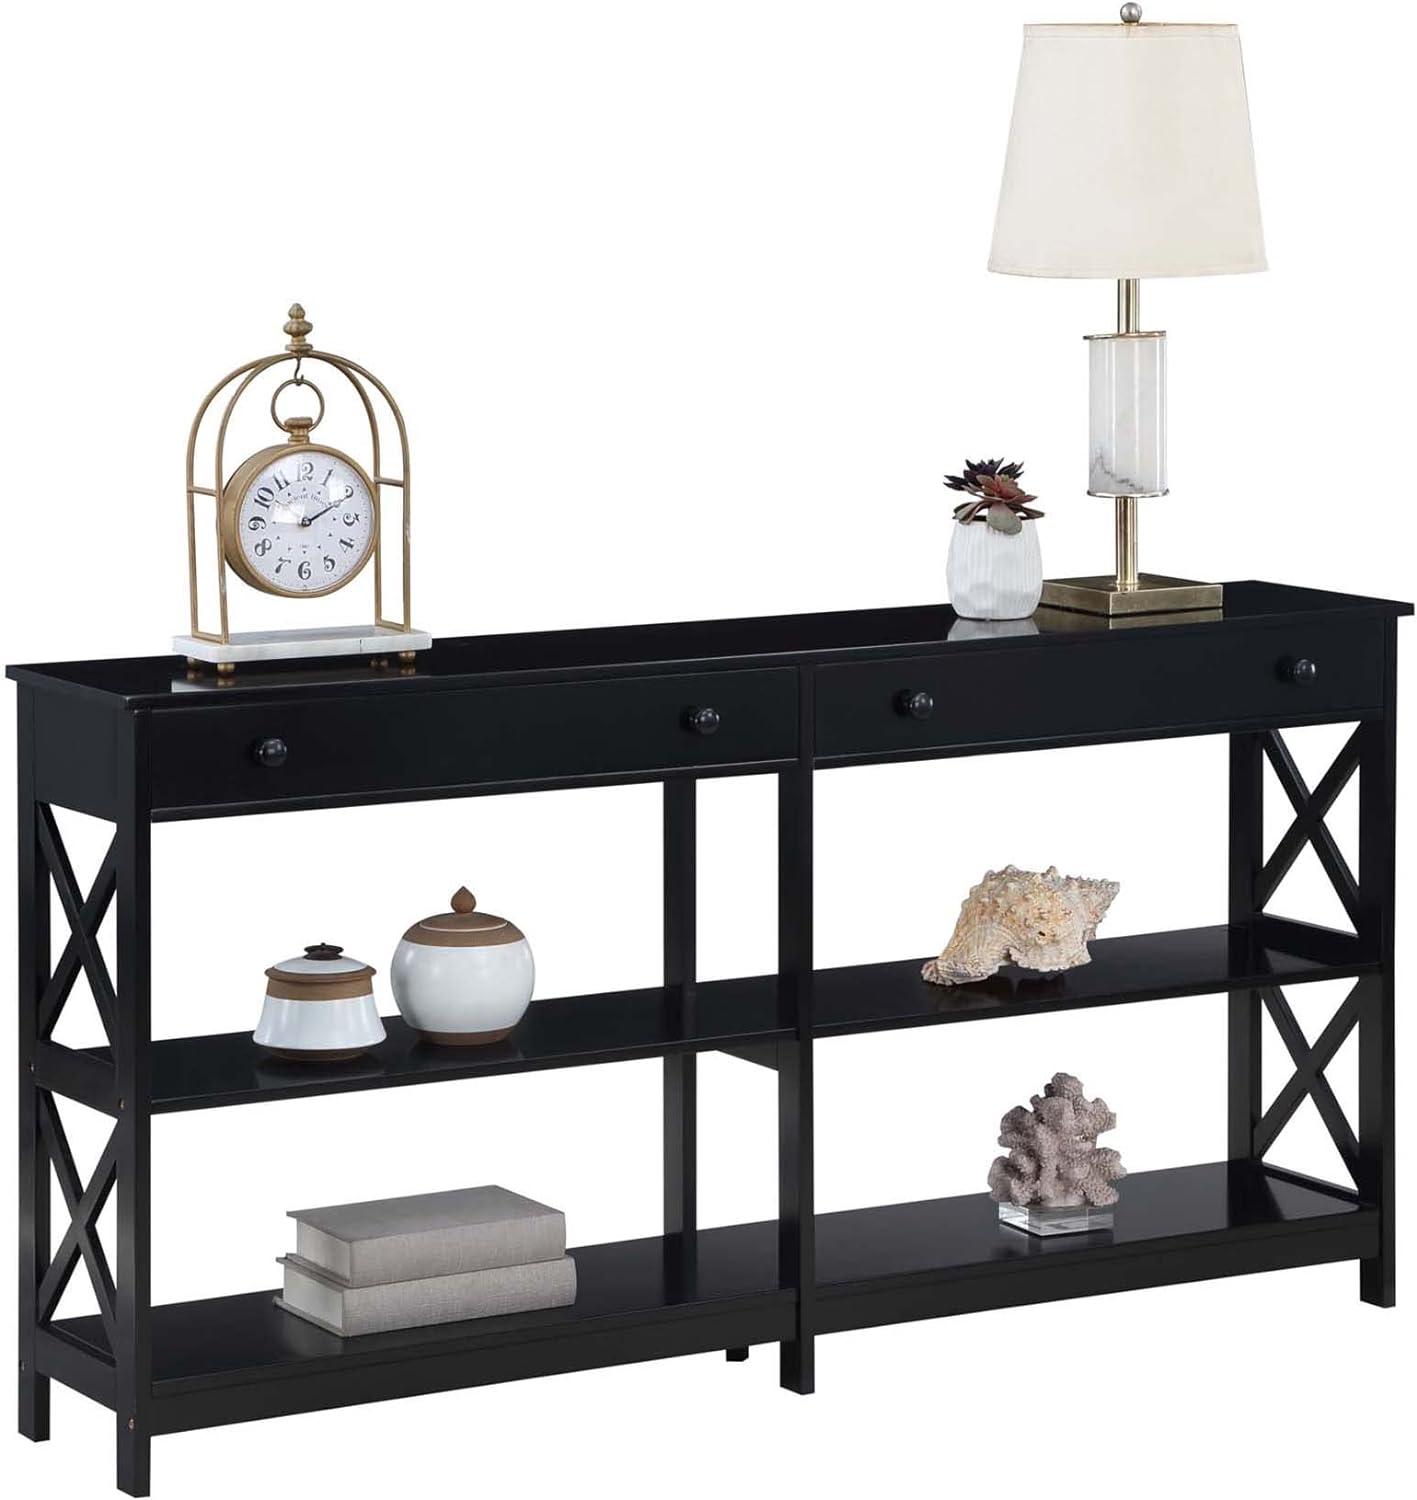 Oxford Black 60" Wood & Metal Console Table with Storage